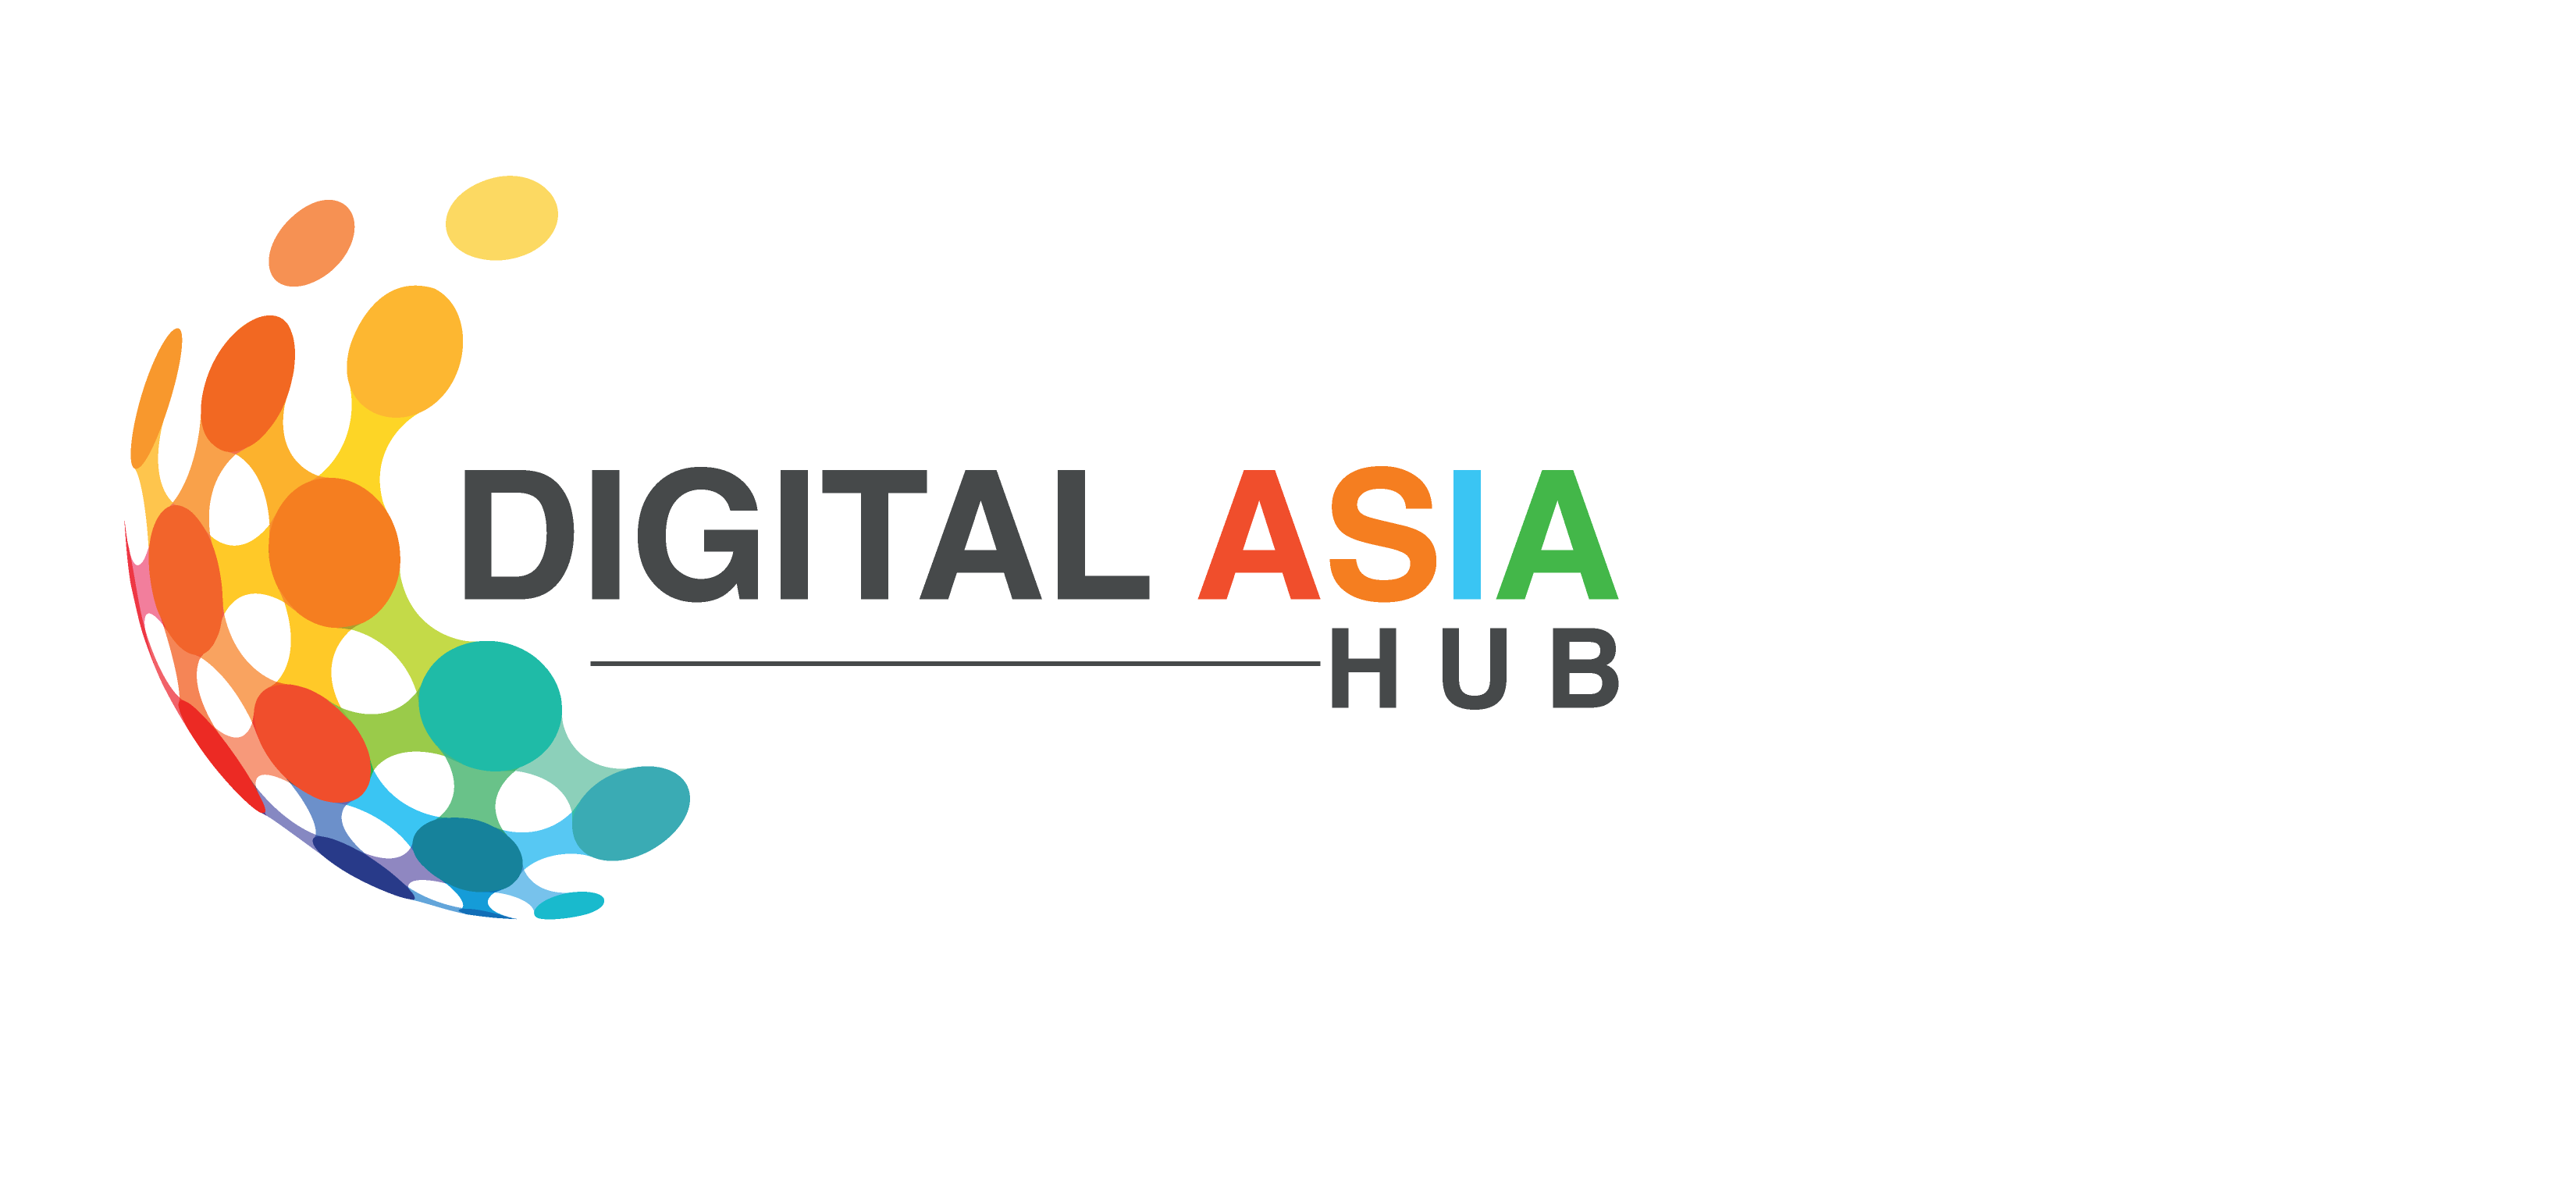 Digital Asia Hub Executive Director on Privacy in Asia